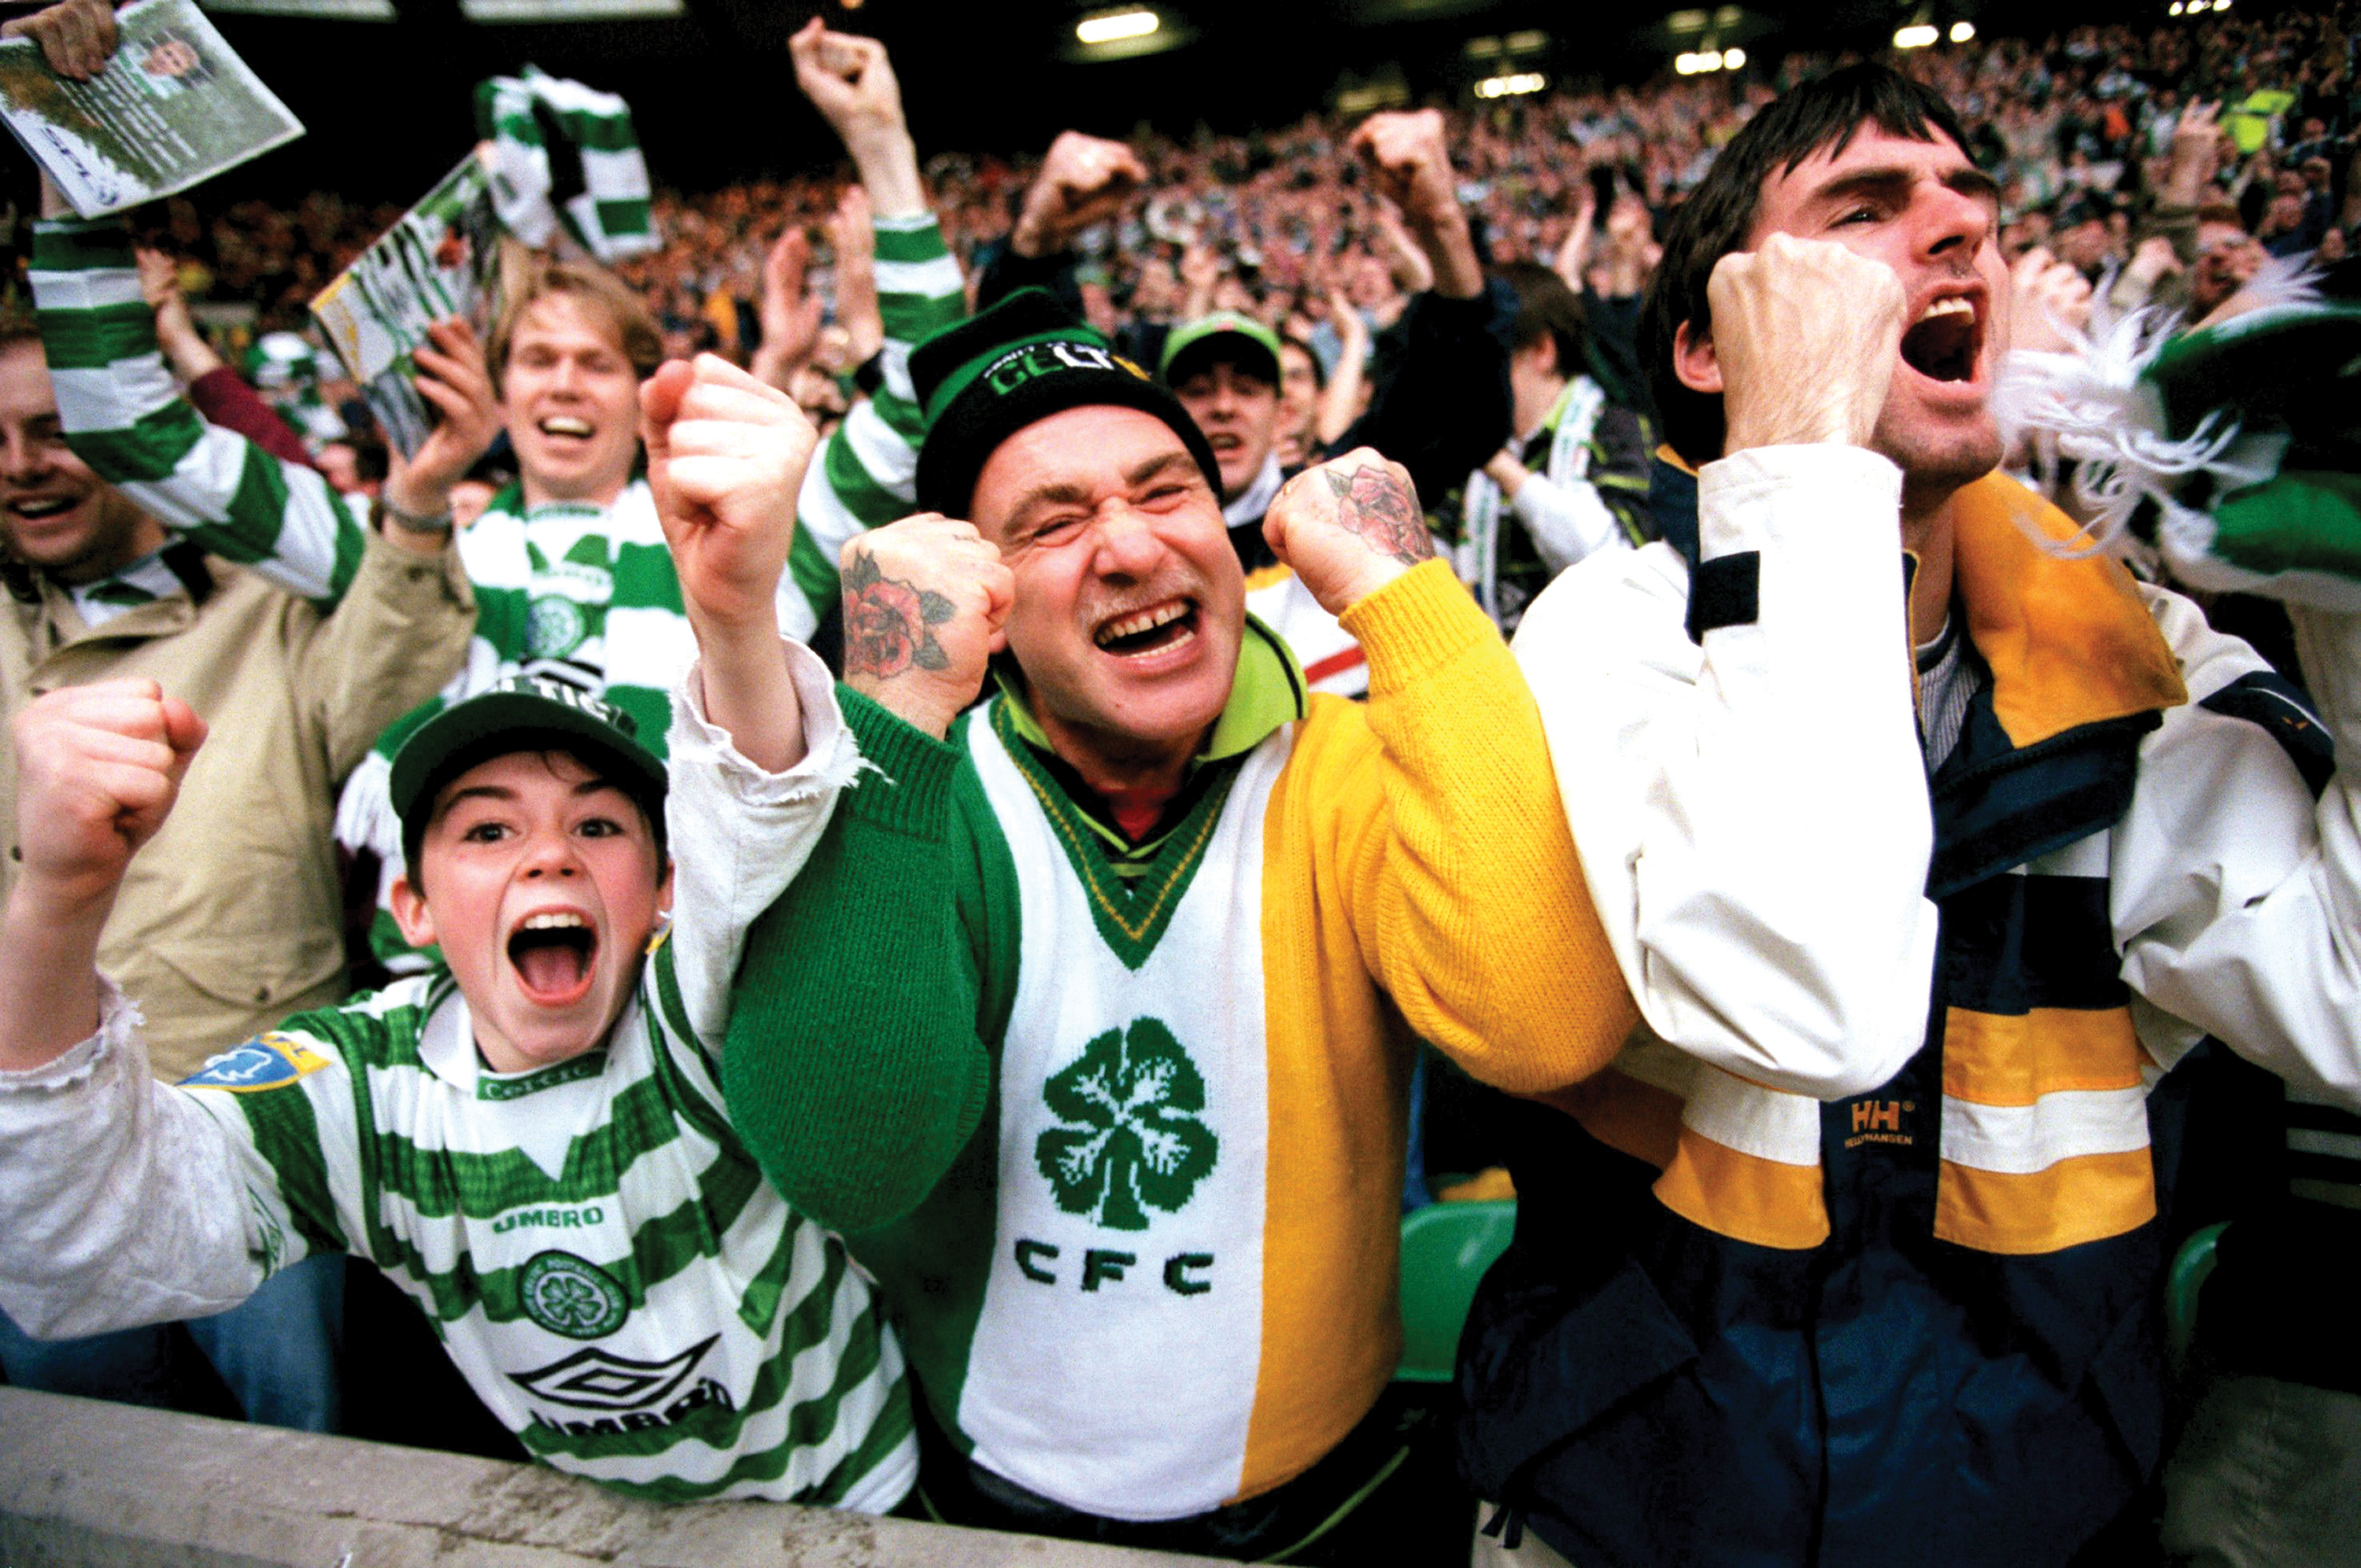 As a Celtic fan, I'll miss Rangers fans coming to Parkhead - the